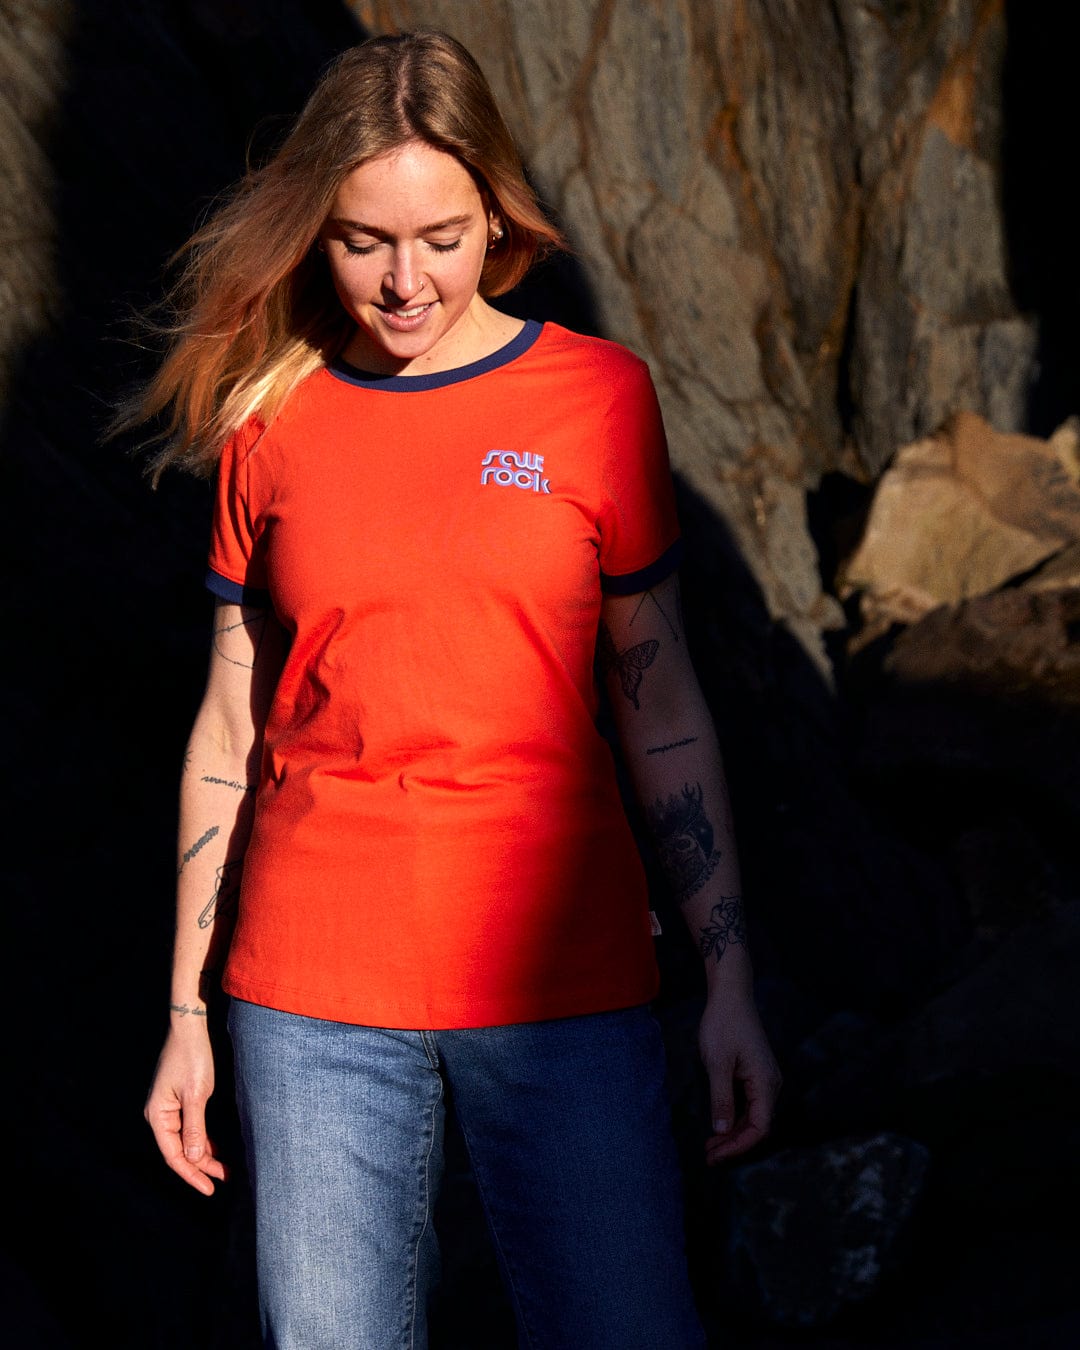 A woman sporting a stylish Saltrock Retro Wave Mini - Womens Short Sleeve T-Shirt - Red, complemented by a casual pair of jeans.